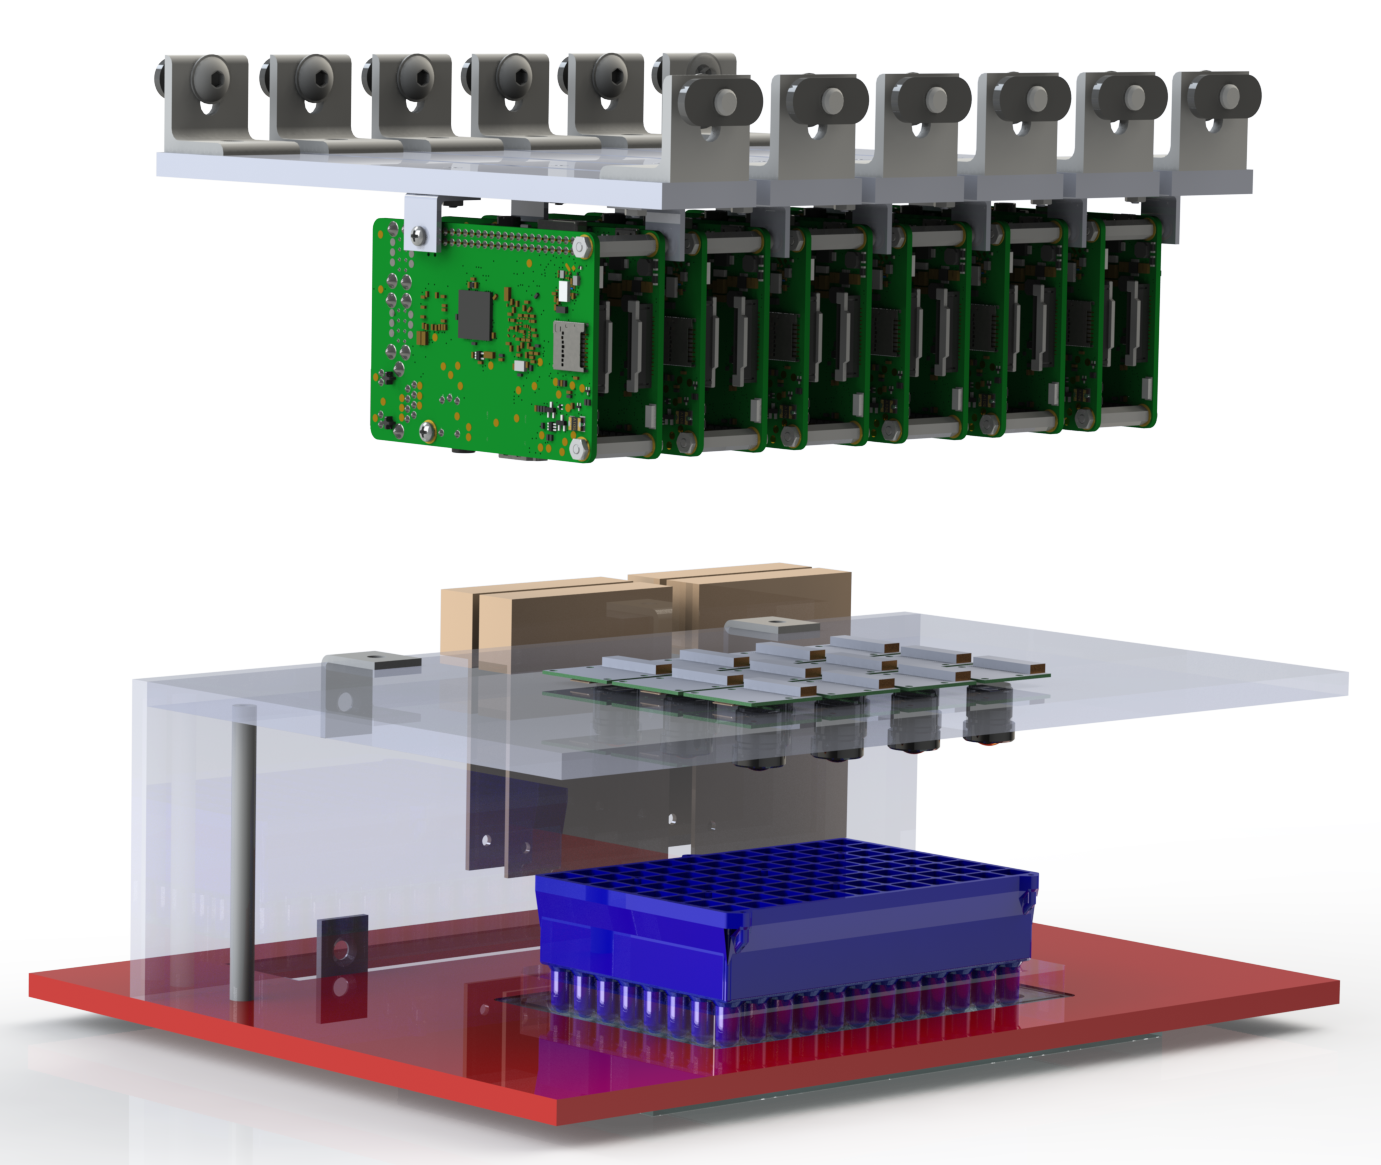 3D CAD of Drosophila 96-well plate video-monitoring system